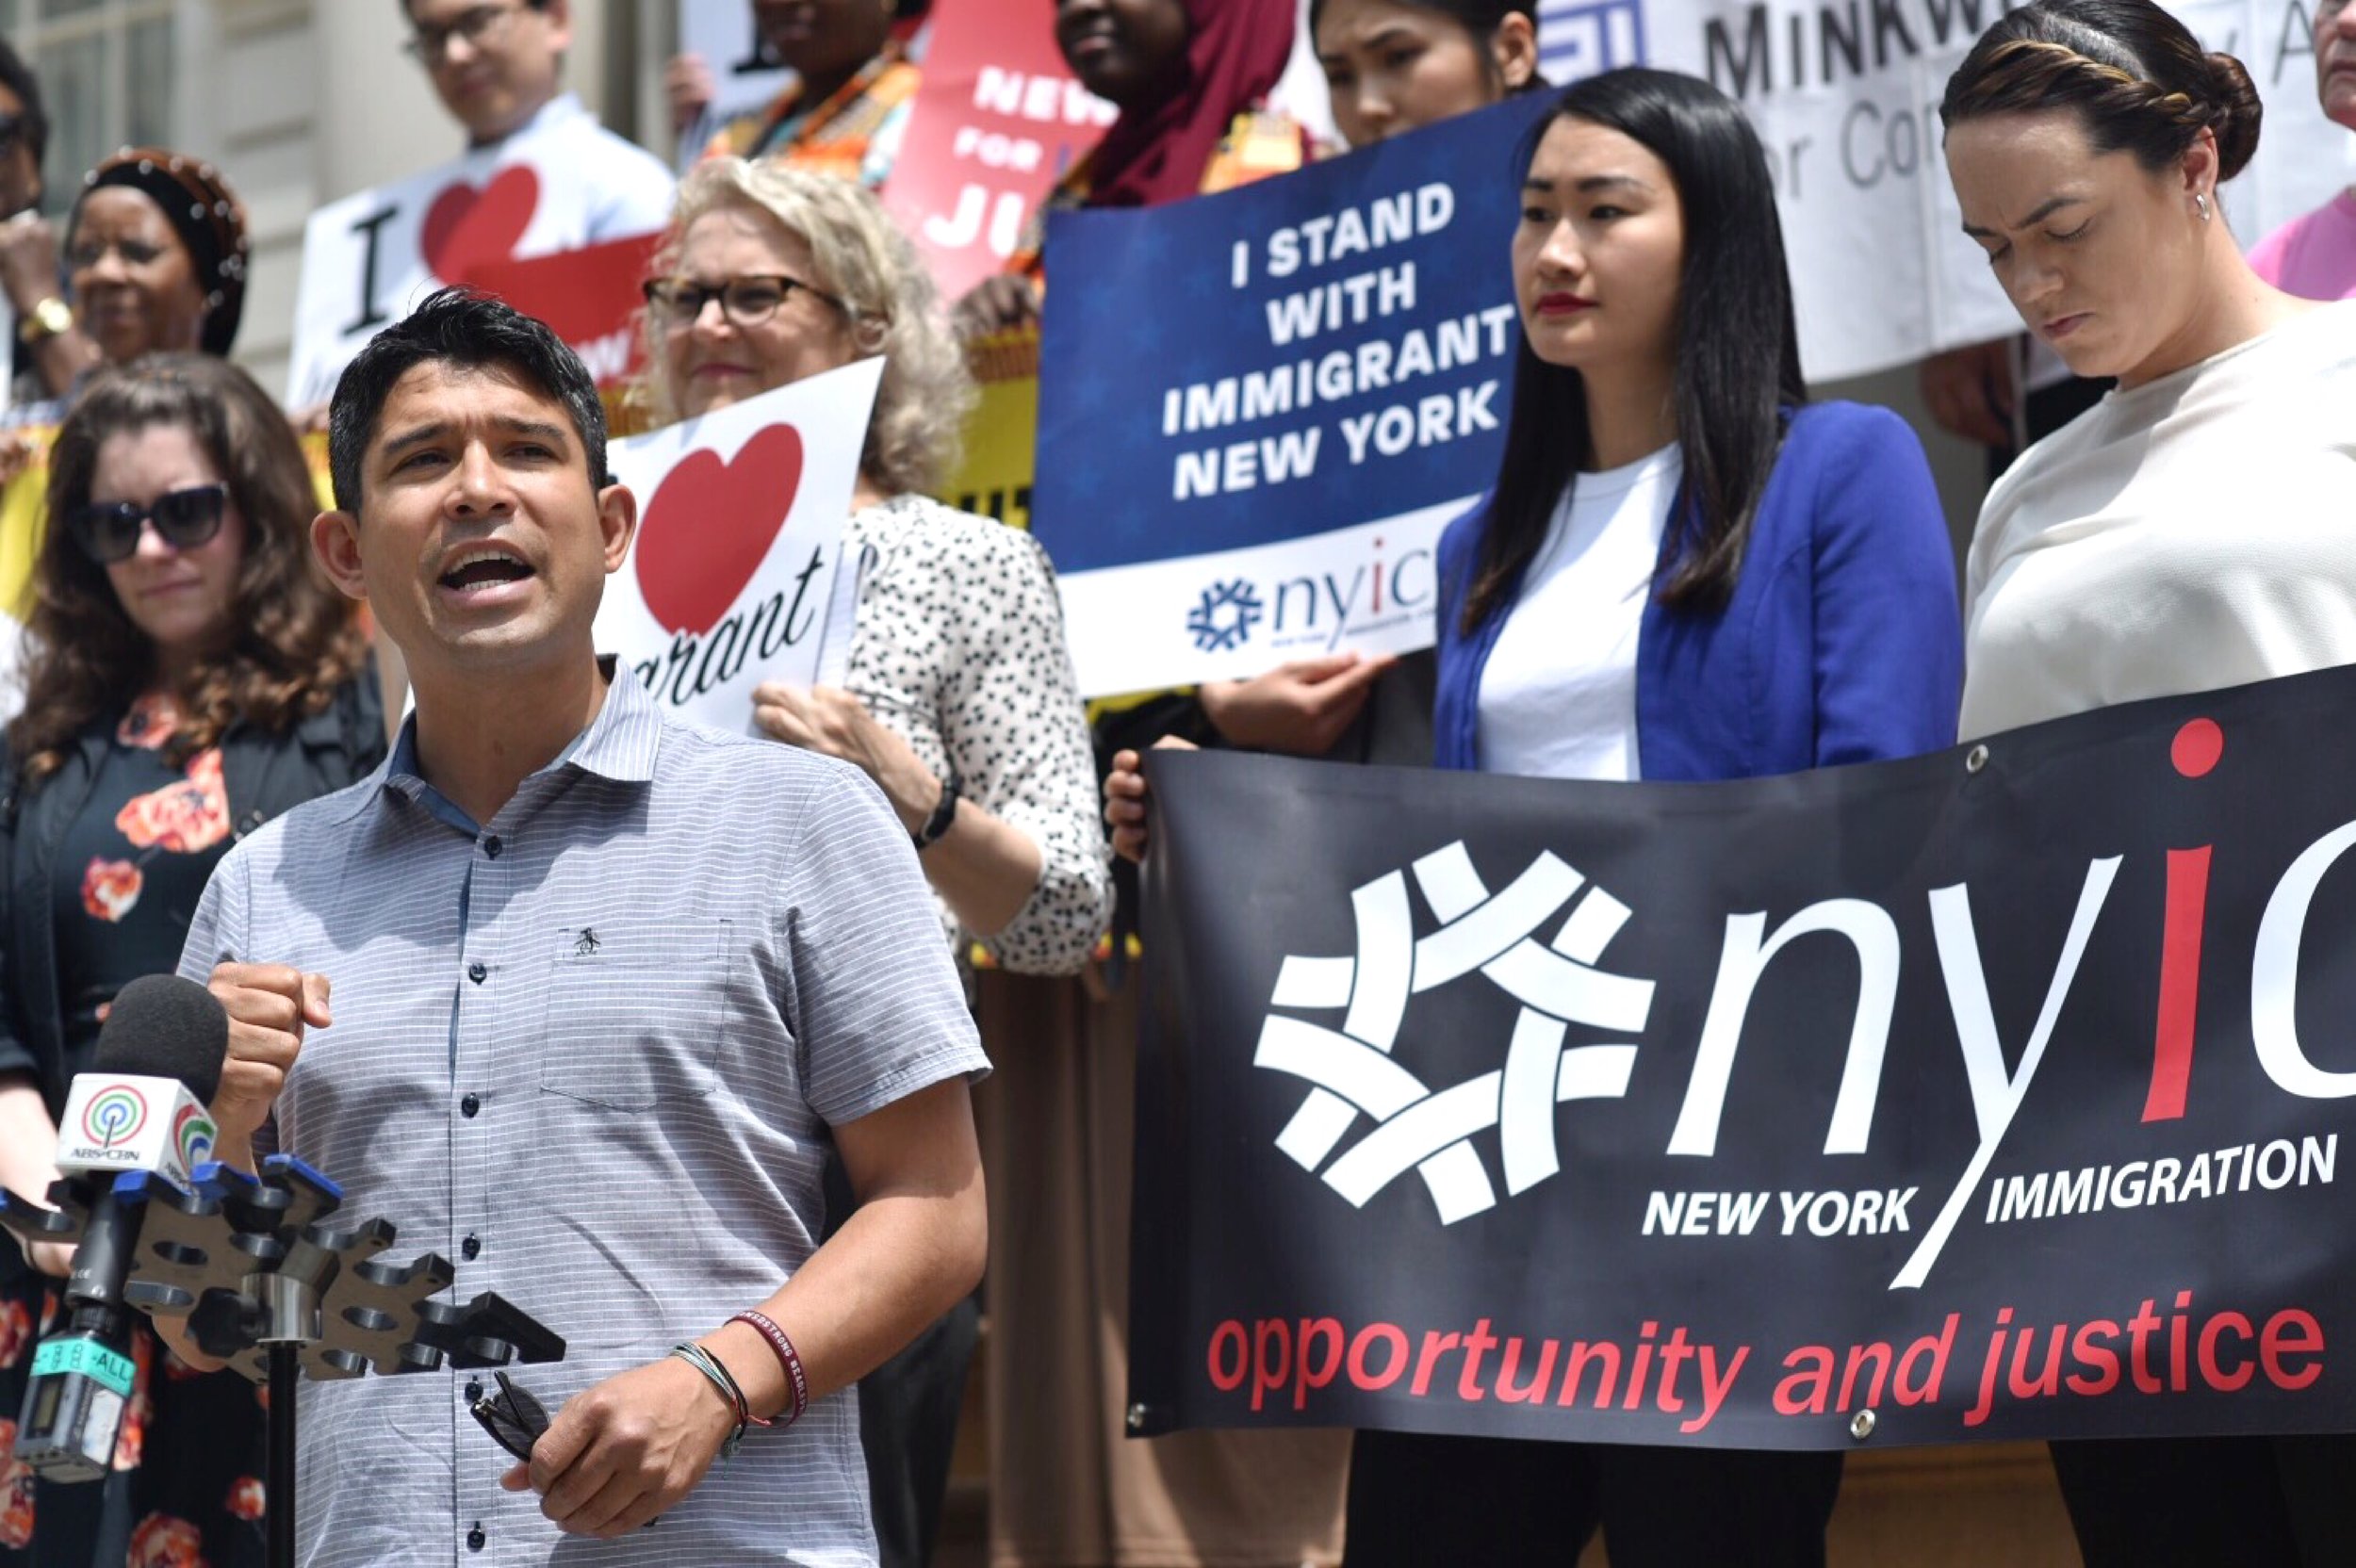 City Council Member Carlos Menchaca Speaks During Immigrant's Rights Press Conference